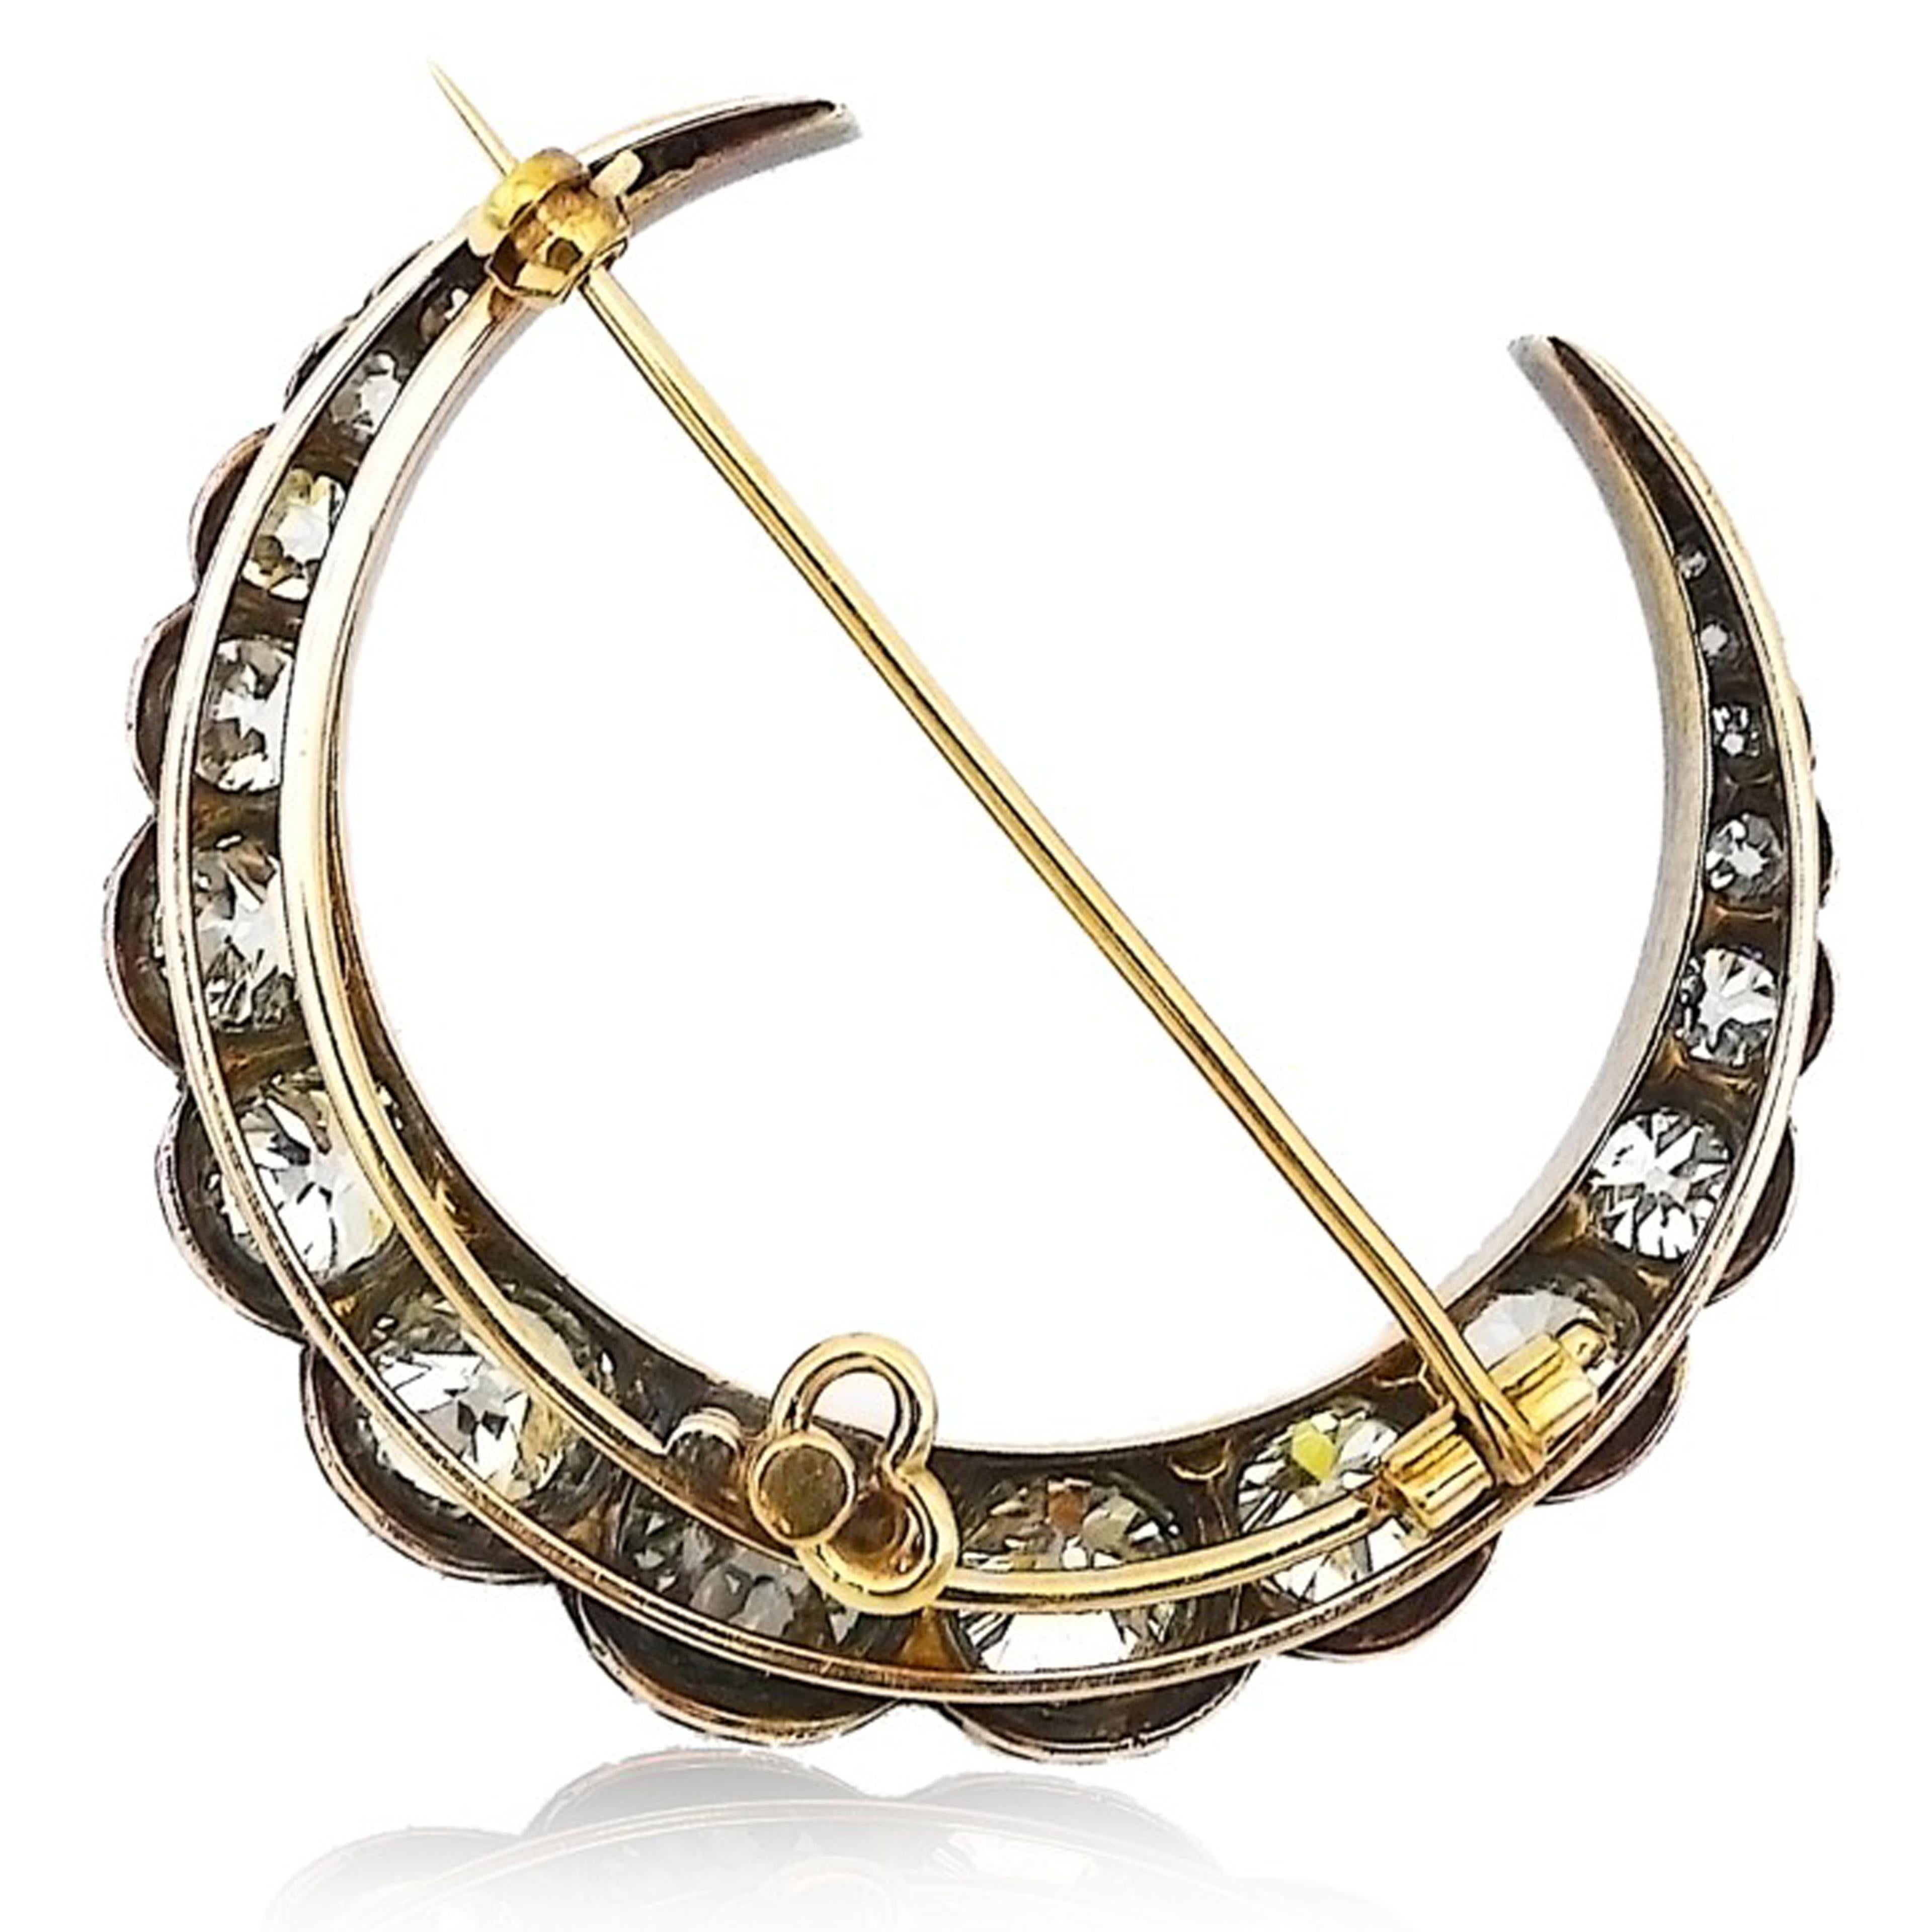 The Crescent Moon Shape Diamond Brooch Which has Around 10 Carats Of Old Cut Diamonds Beautifully Crafted in Silver and Gold.
The Diamonds Are Set in Silver and Gold, Commensurate With the Age and Tradition. The Back Of The Crescent Is Yellow Gold,